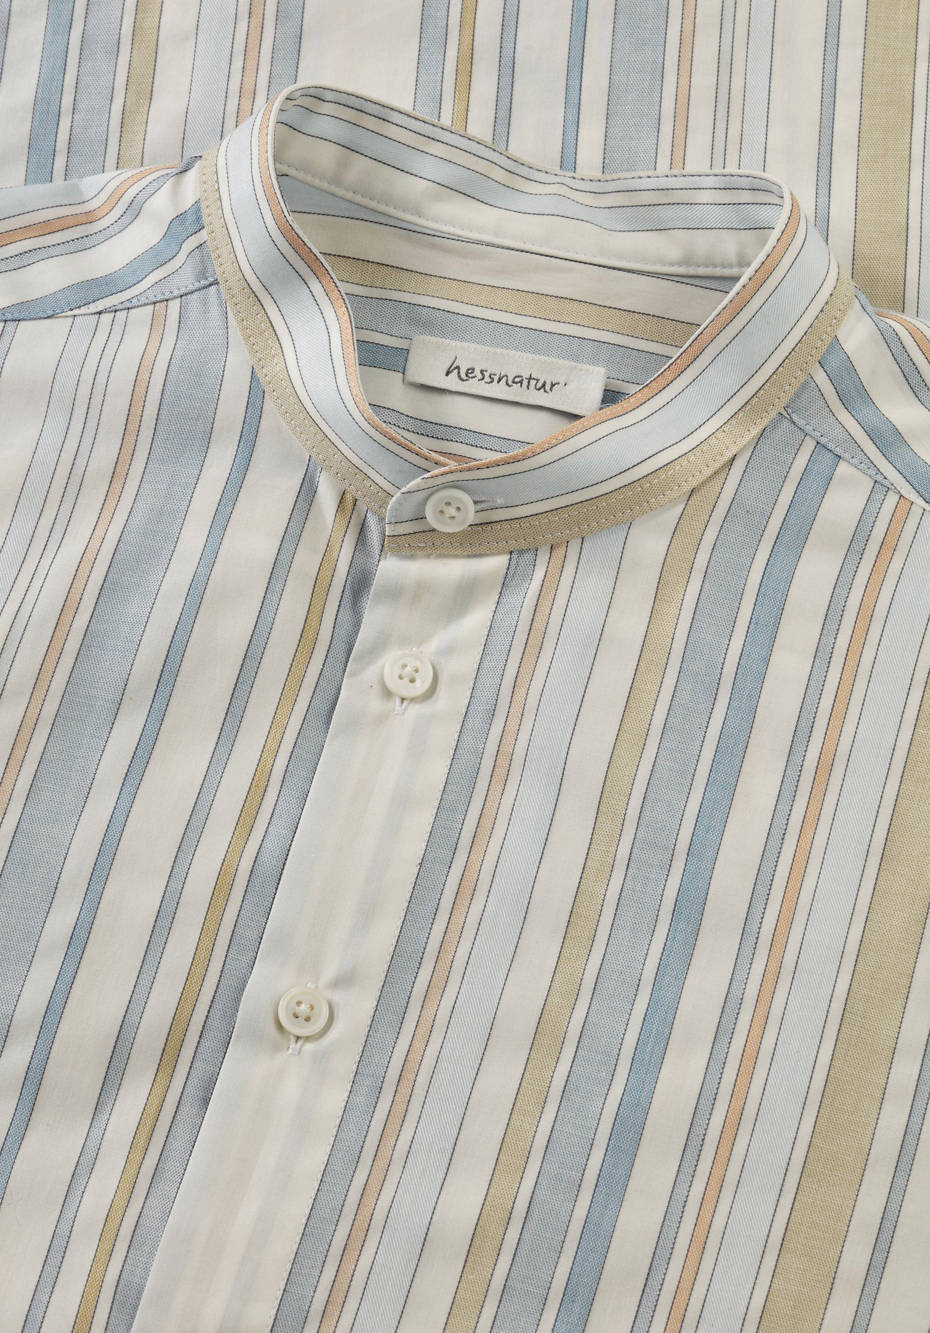 Comfort Fit striped shirt made of pure organic cotton